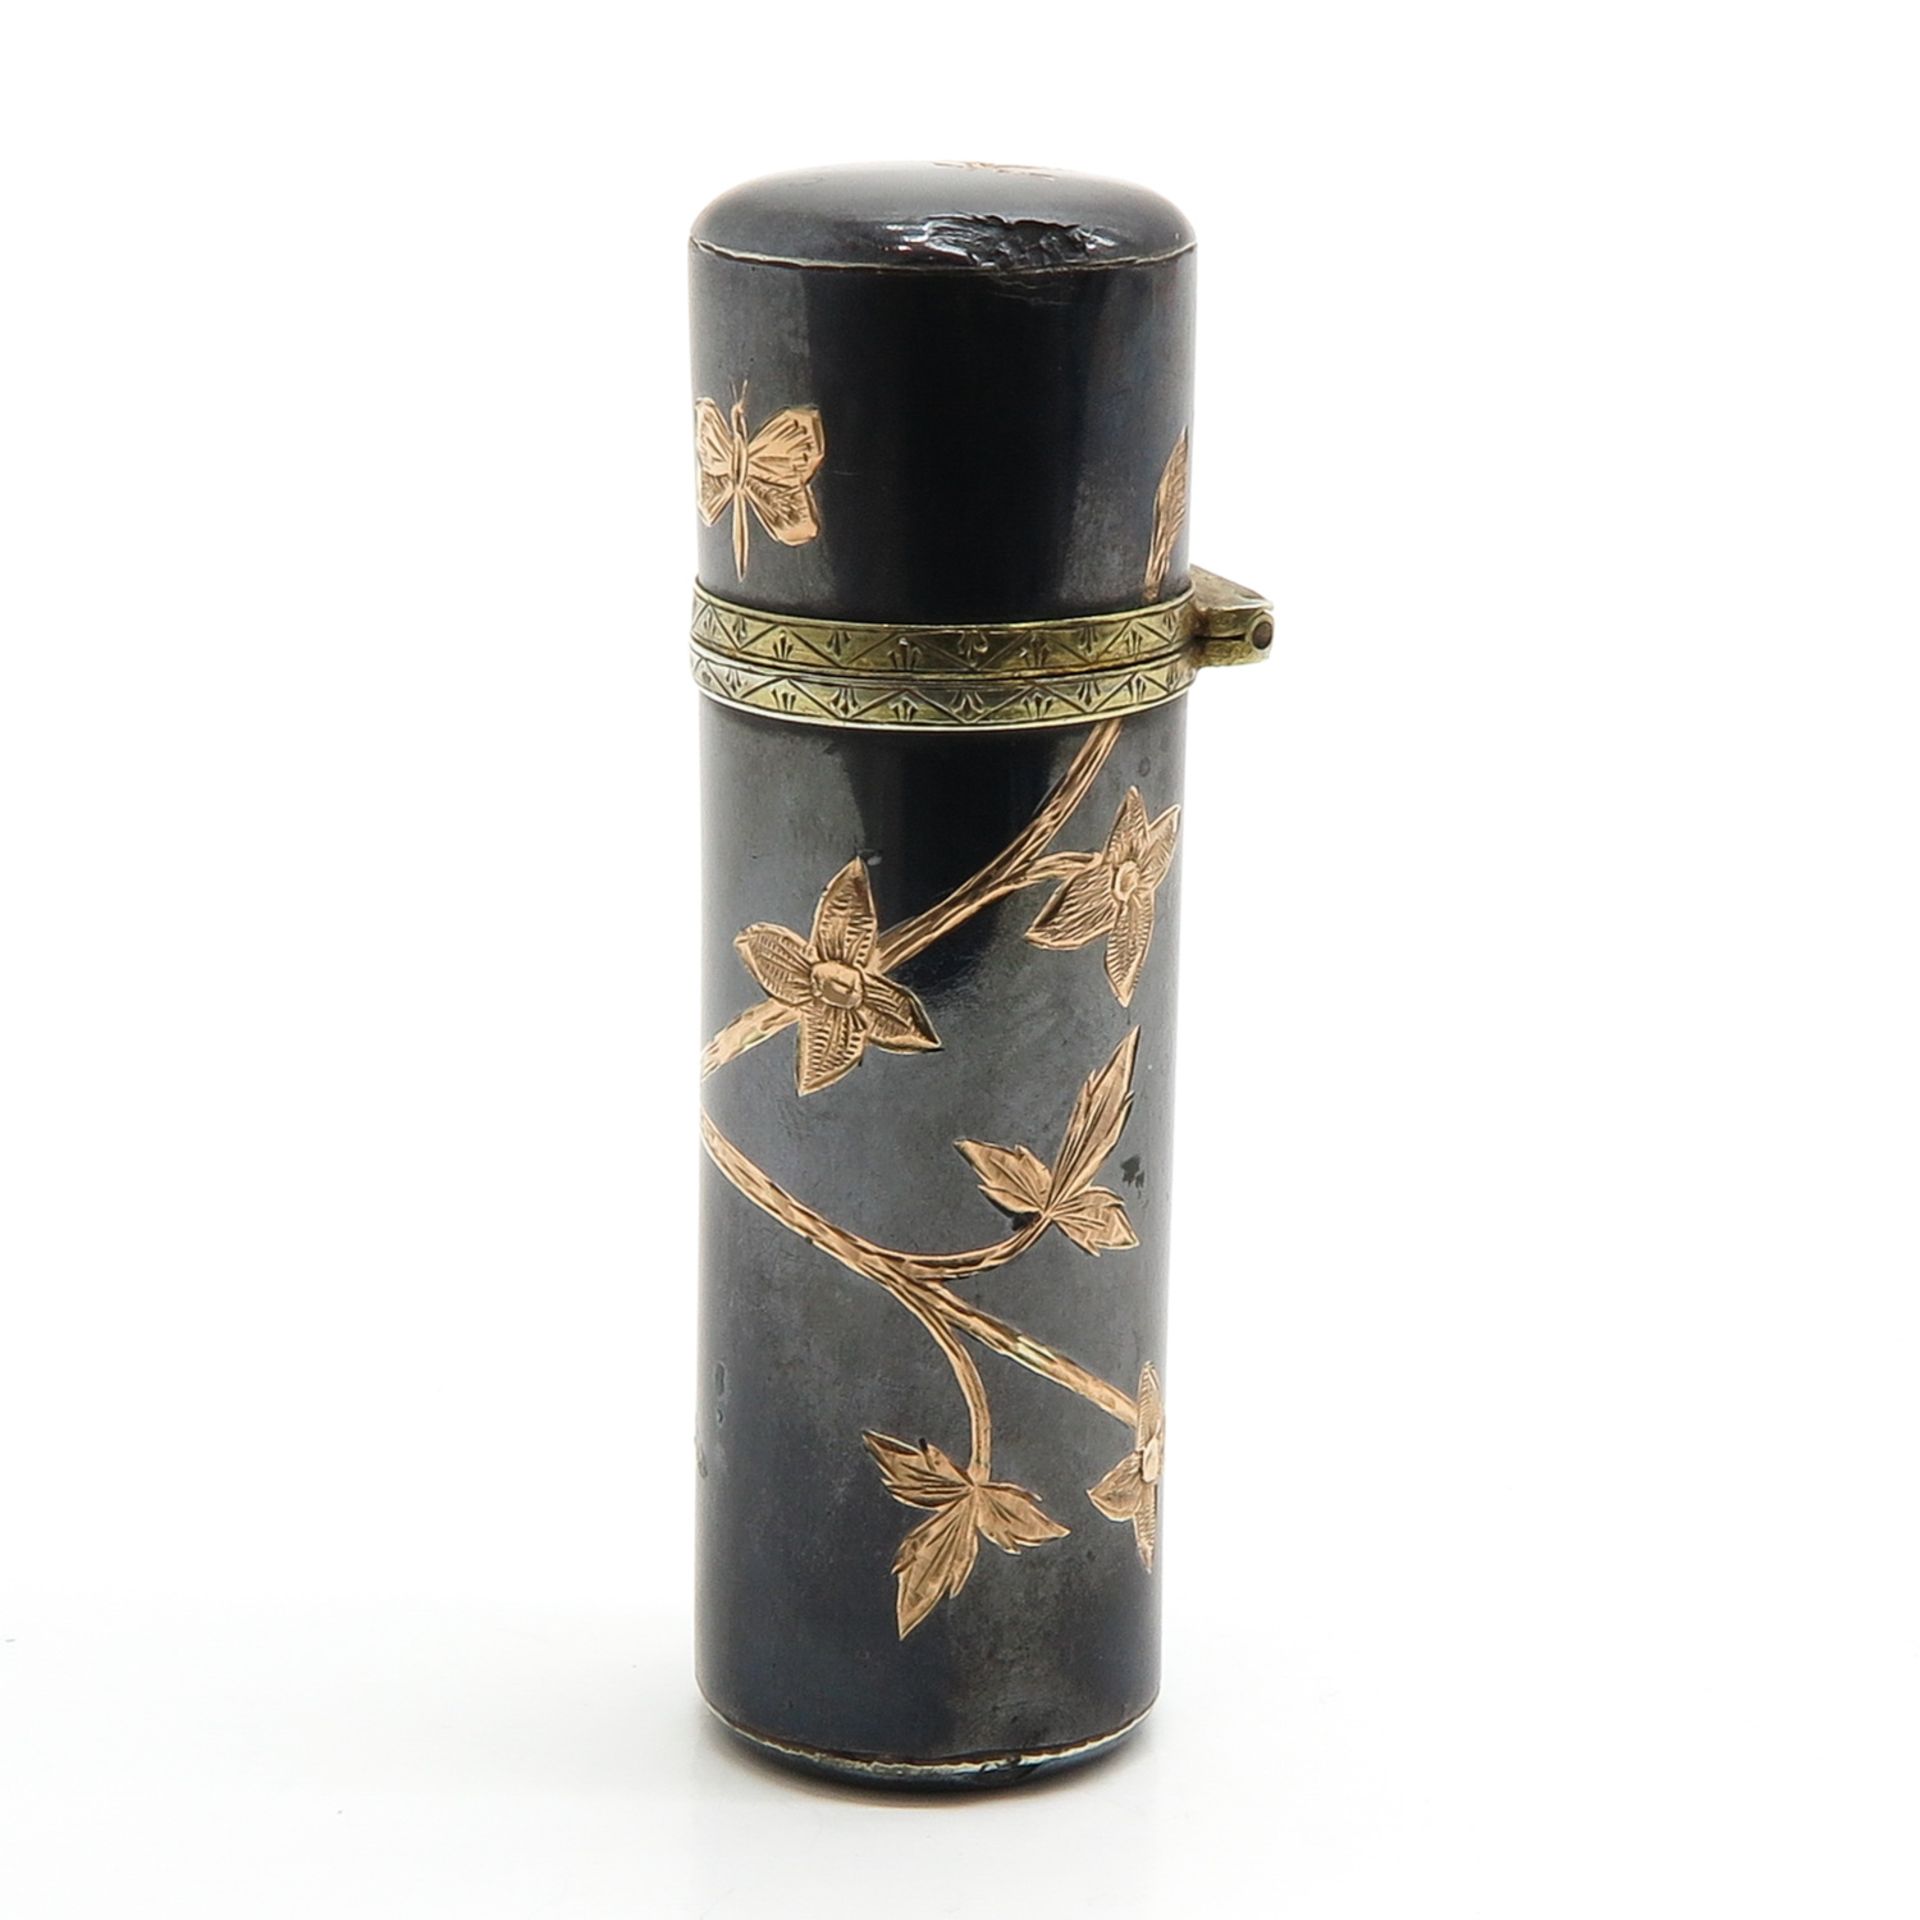 A Scent Bottle with Gold Inlay